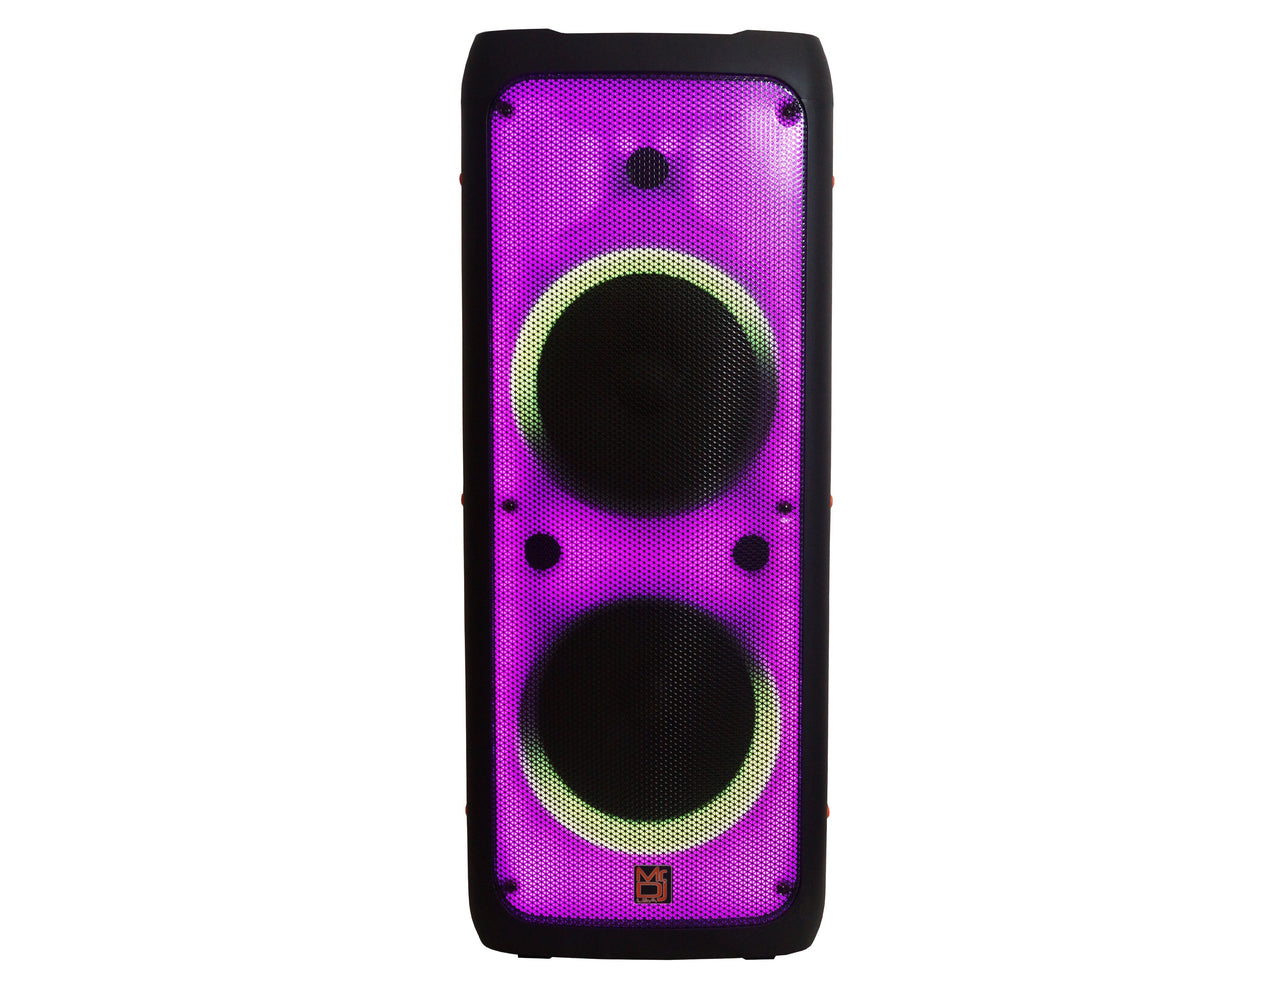 MR DJ FLAME5500LED Professional Rechargeable Portable Dual 12” 3-Way Full-Range Powered/Active DJ PA Multipurpose Live Sound Bluetooth Loudspeaker with Full Fire Flame Glow Disco Lights and Two Wireless Microphones